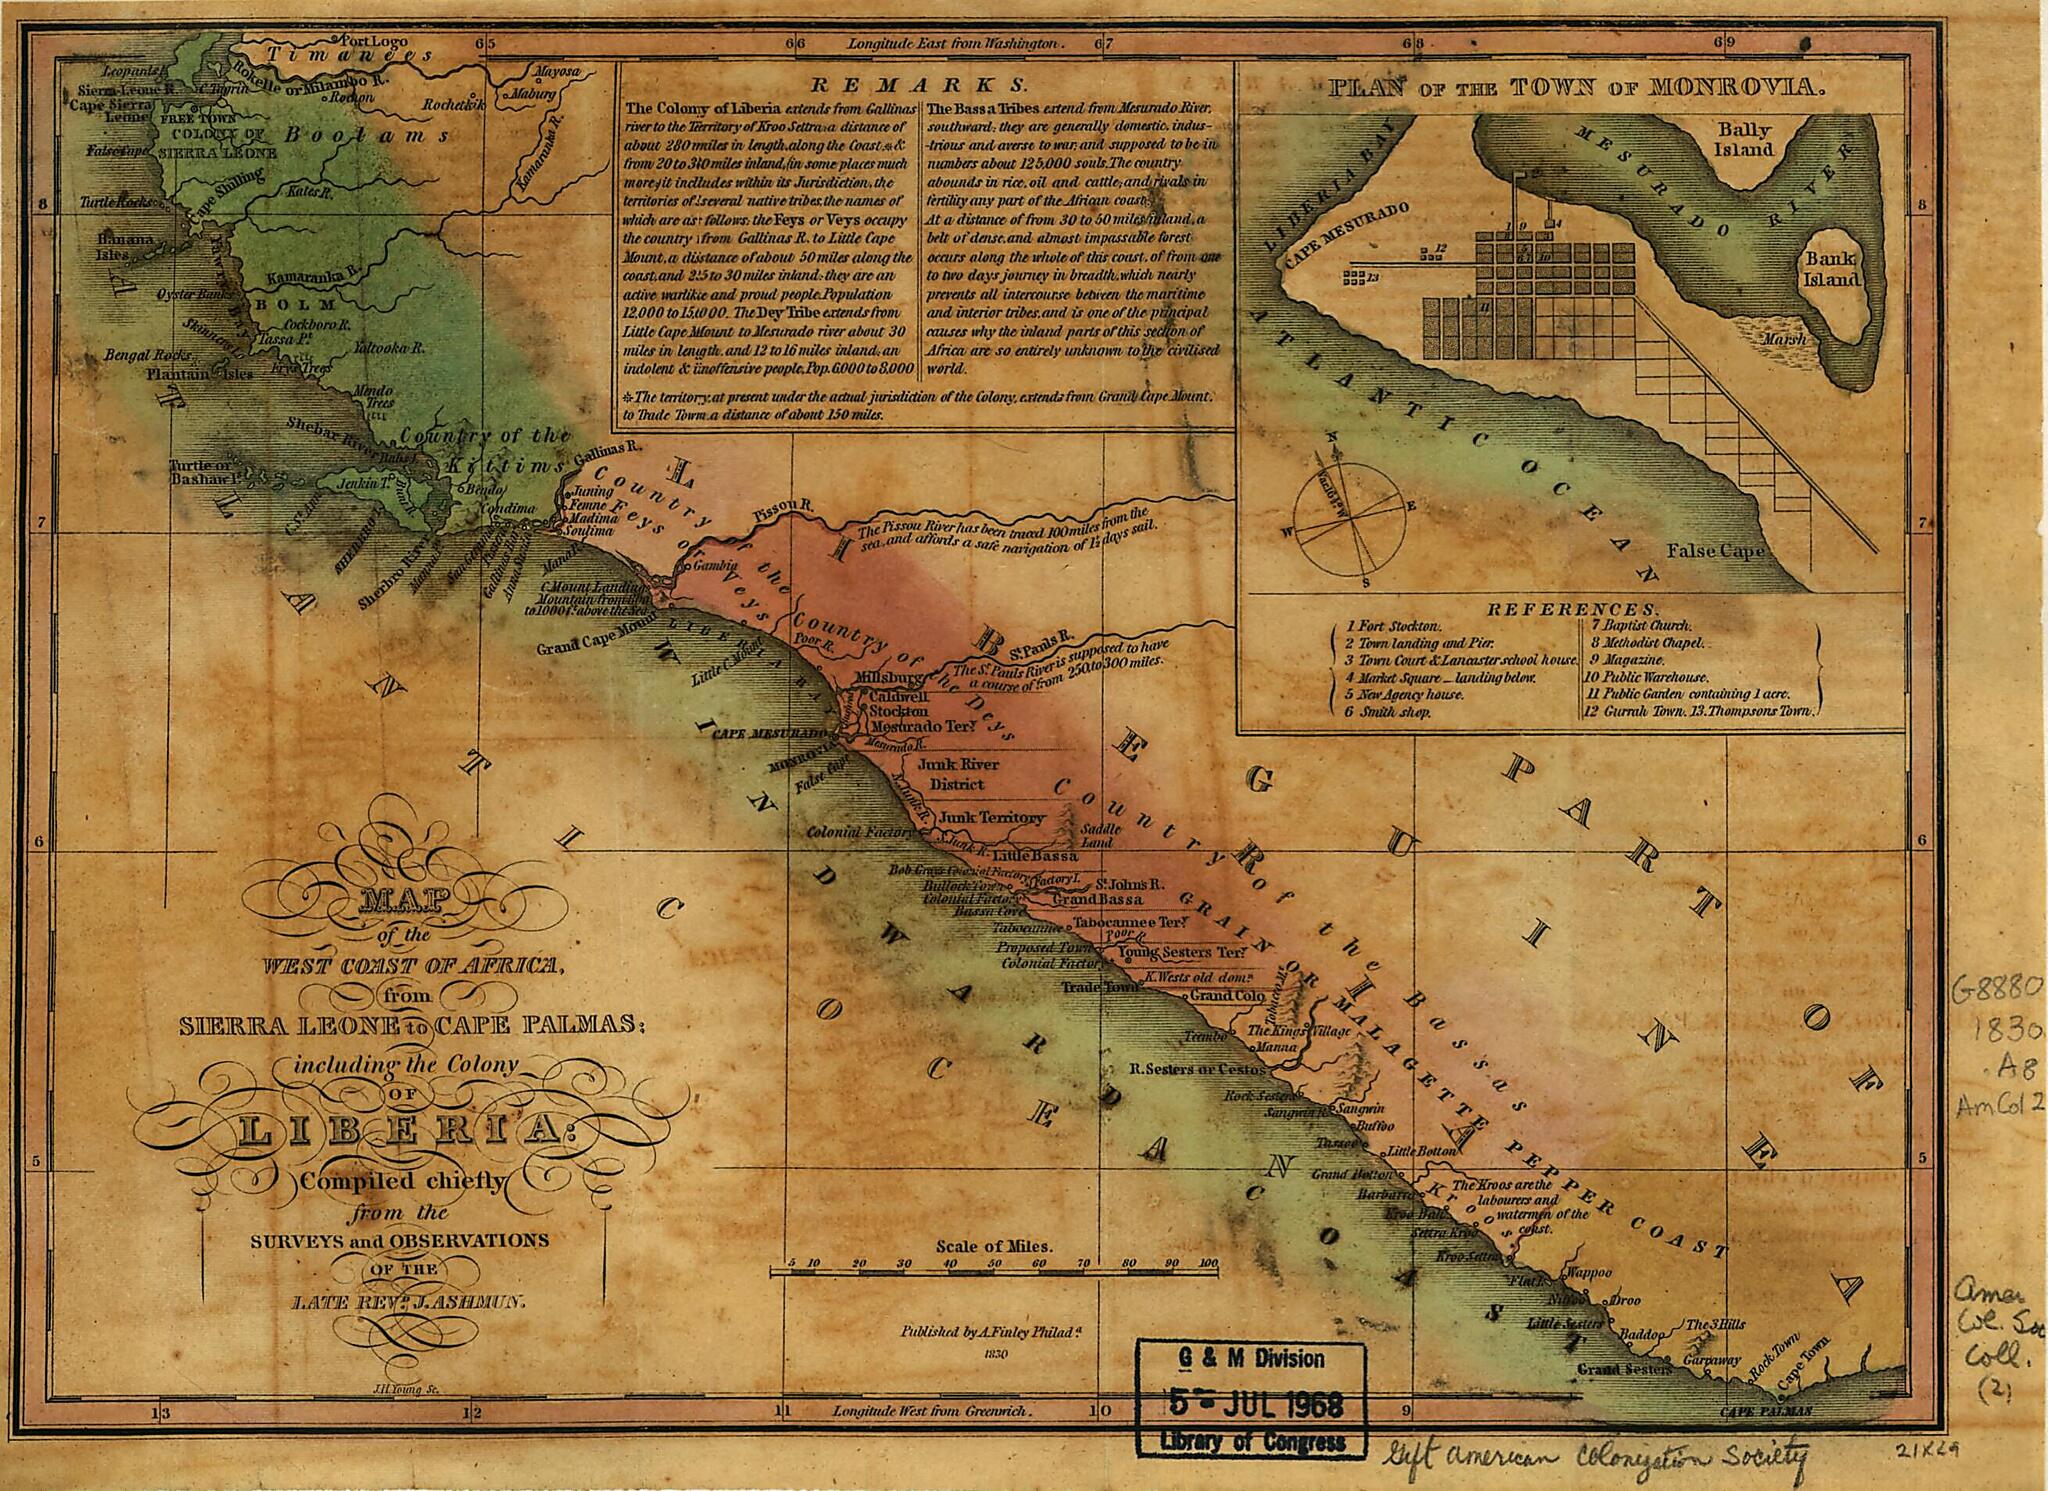 This old map of Map of the West Coast of Africa from Sierra Leone to Cape Palmas, Including the Colony of Liberia from 1830 was created by J. (Jehudi) Ashmun, A. (Anthony) Finley, J. H. (James Hamilton) Young in 1830